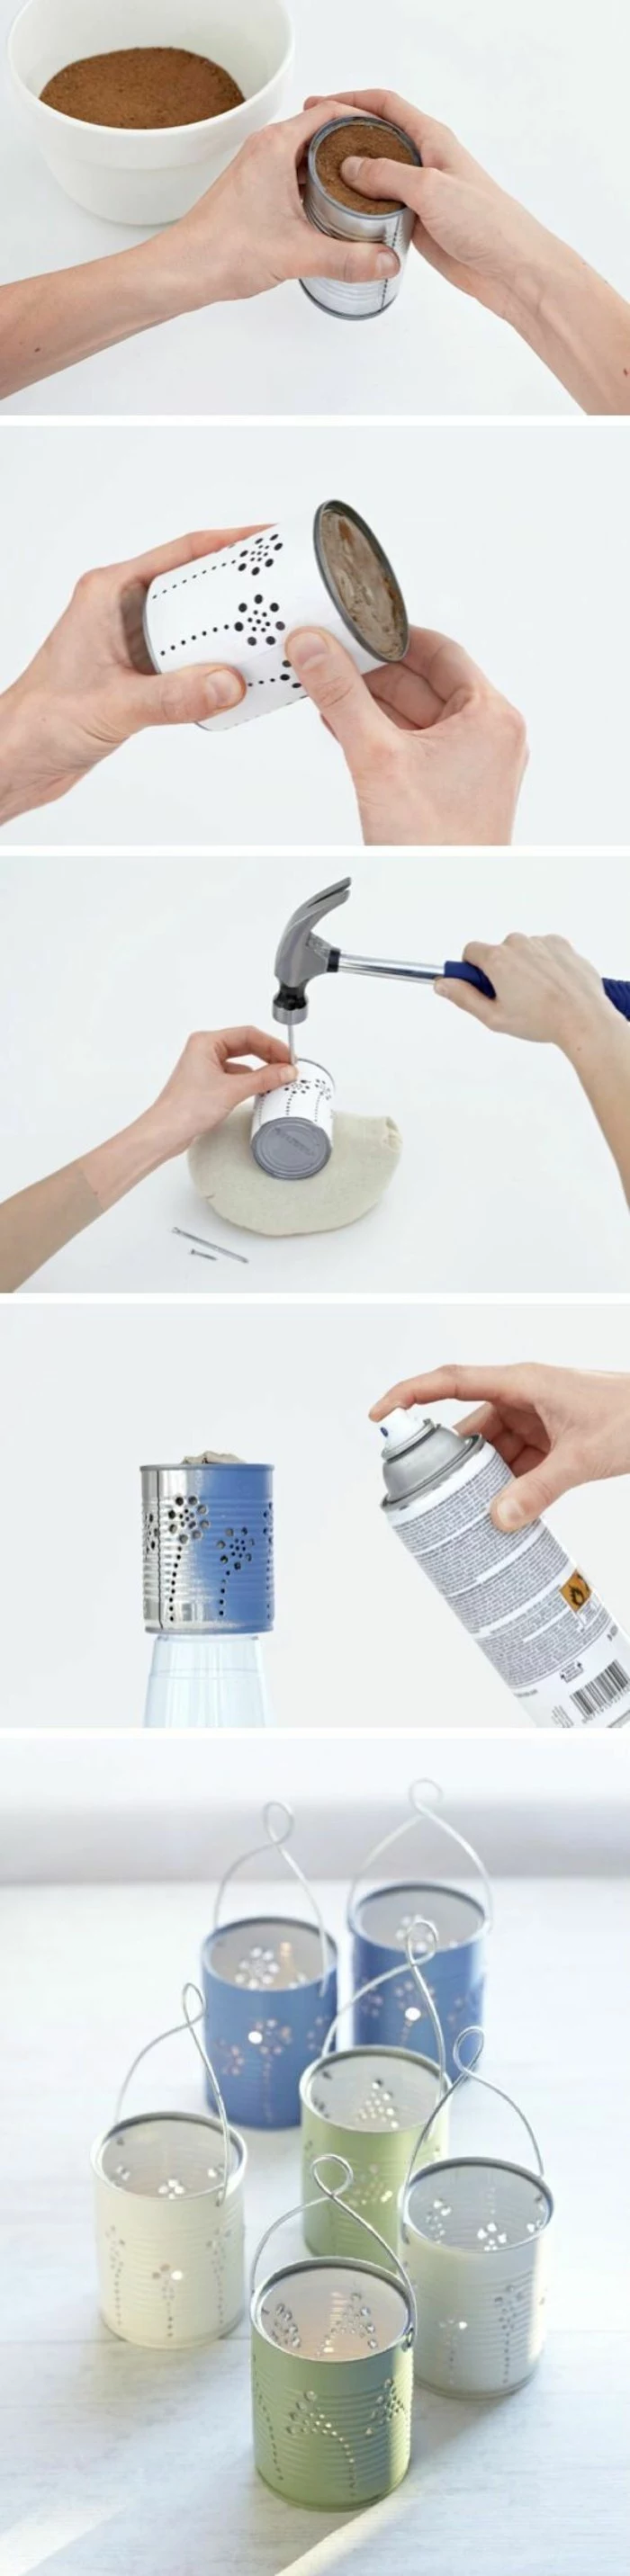 empty tin cans, six luminaries made from cans colored in light green and blue, hands filling can with dirt, making holes following a pattern with nail and hammer, spraying can with blue paint